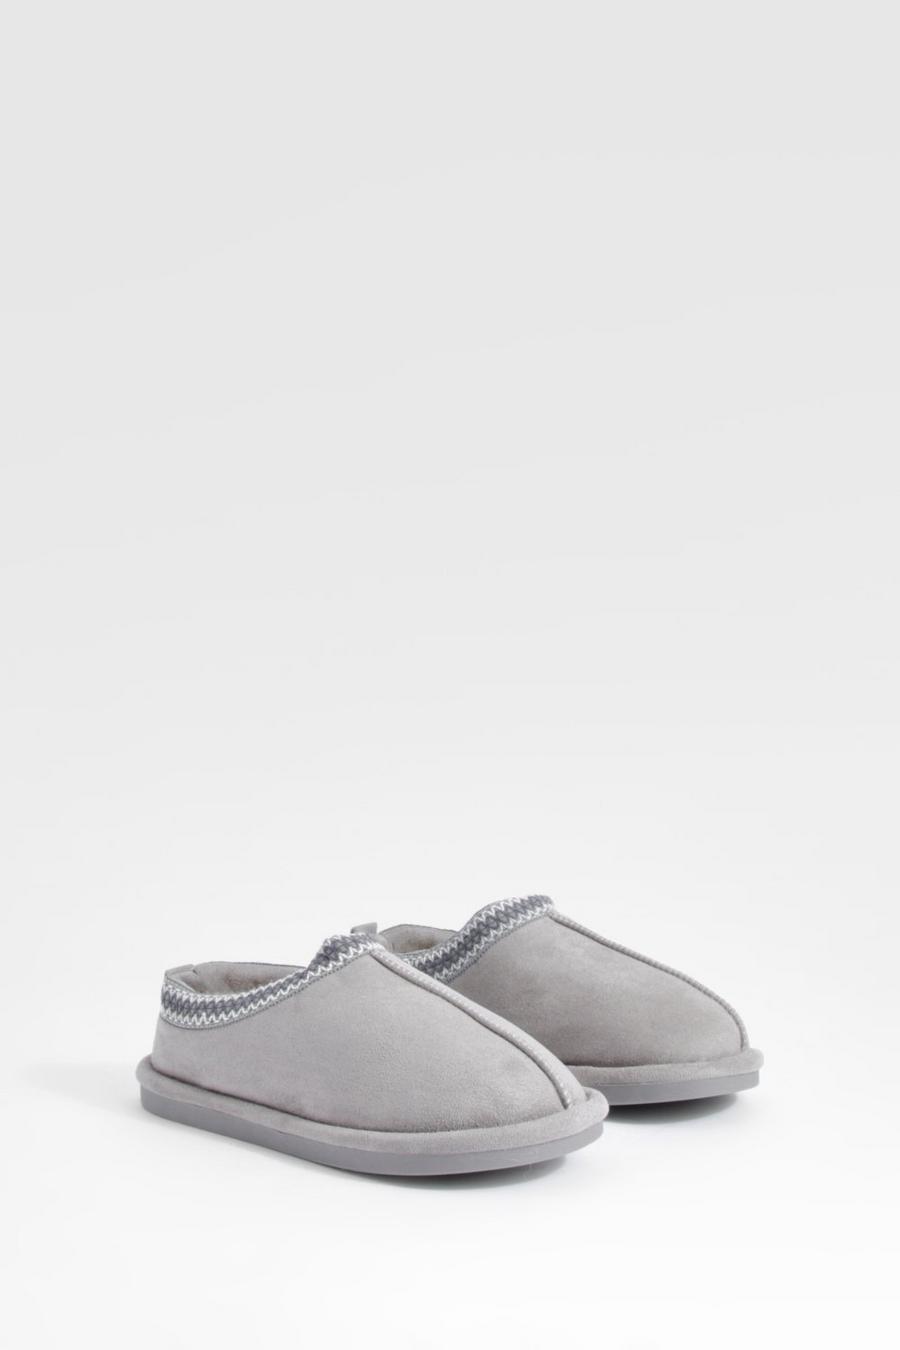 Grey Embroidered Slip On Cosy Mules  